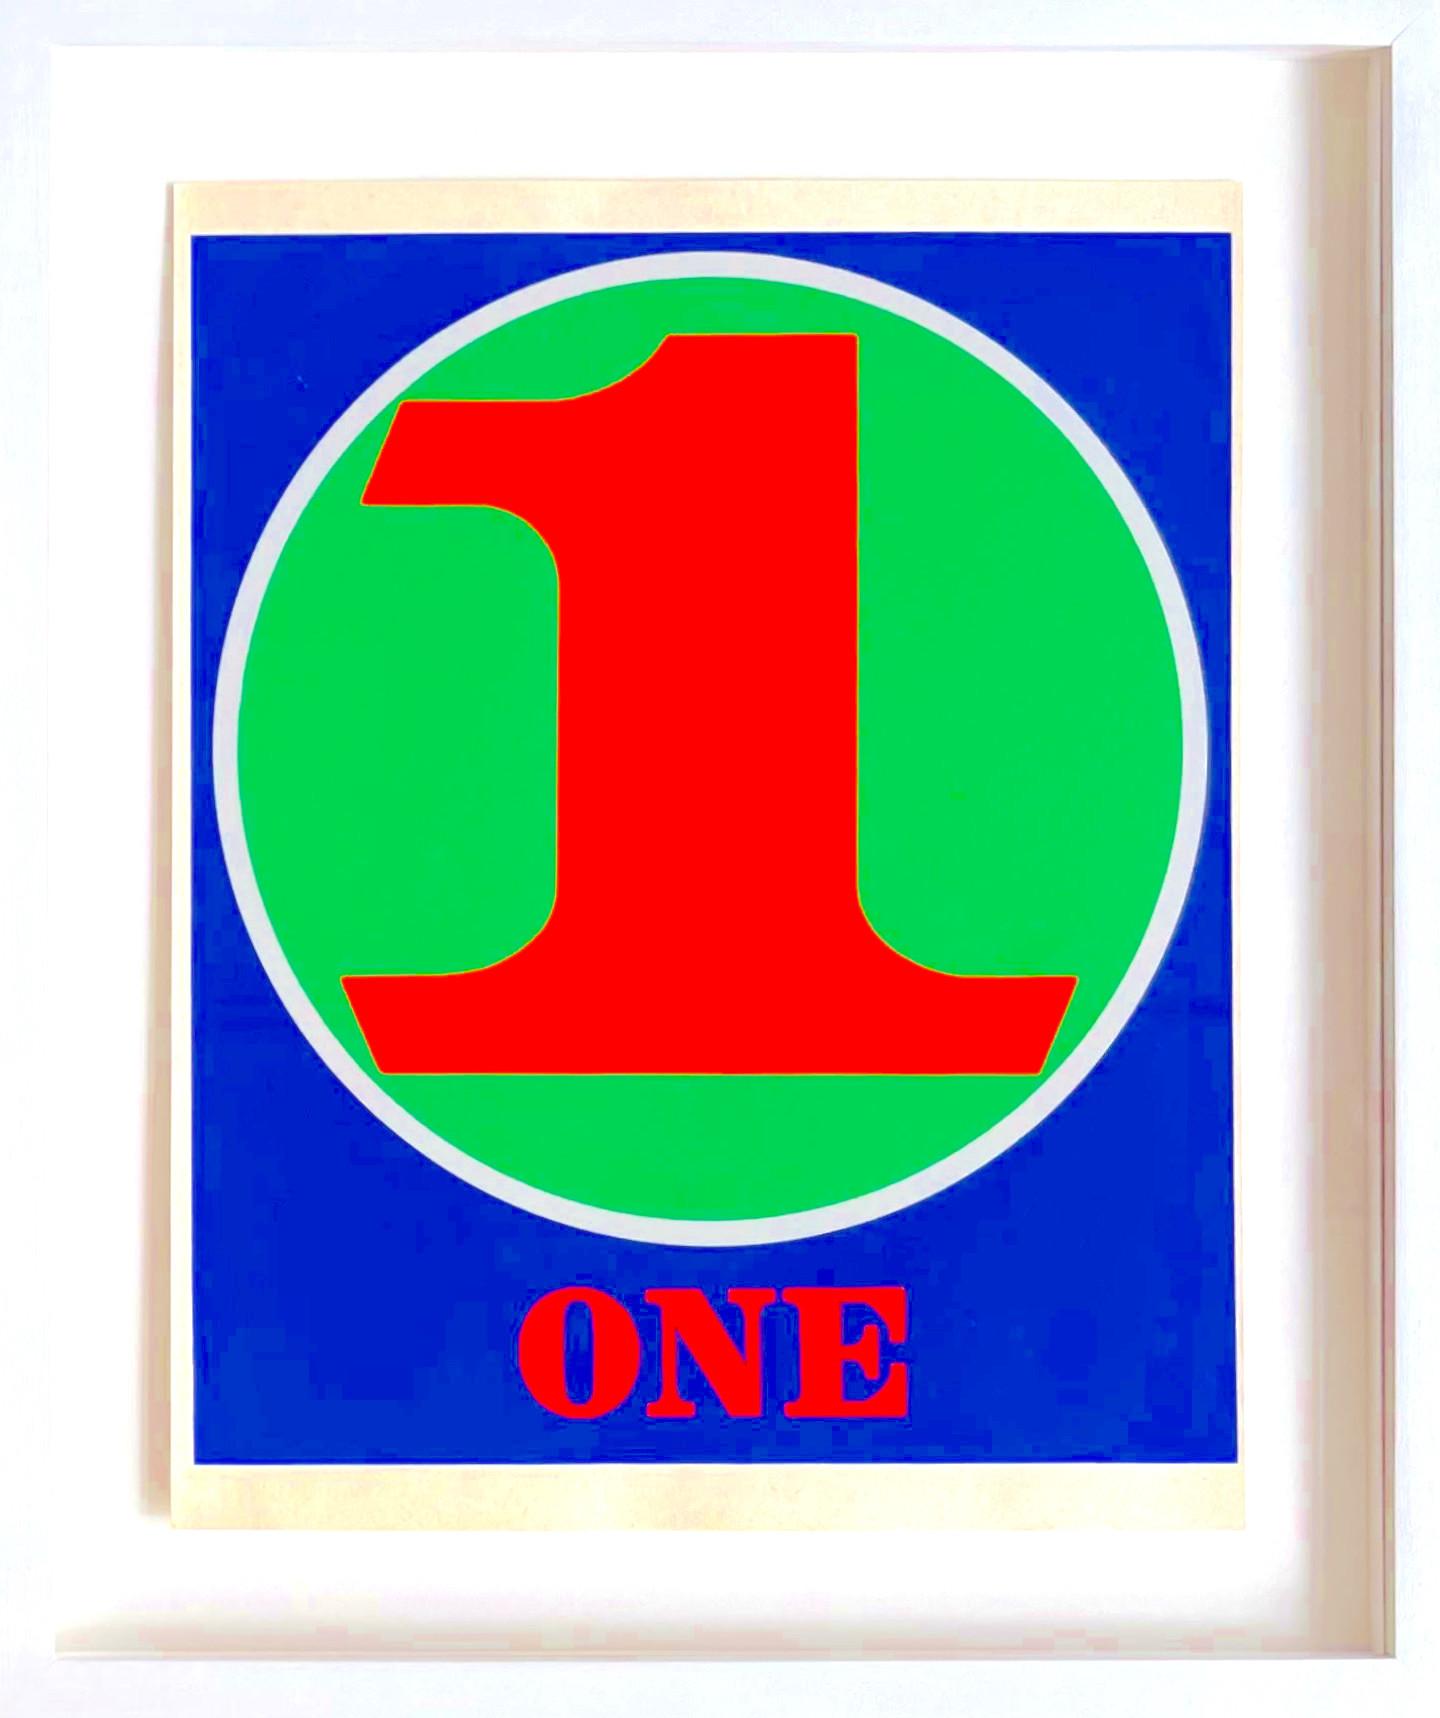 Robert Indiana Abstract Print - 1 (One), from the original Numbers portfolio (Sheehan 46-55)